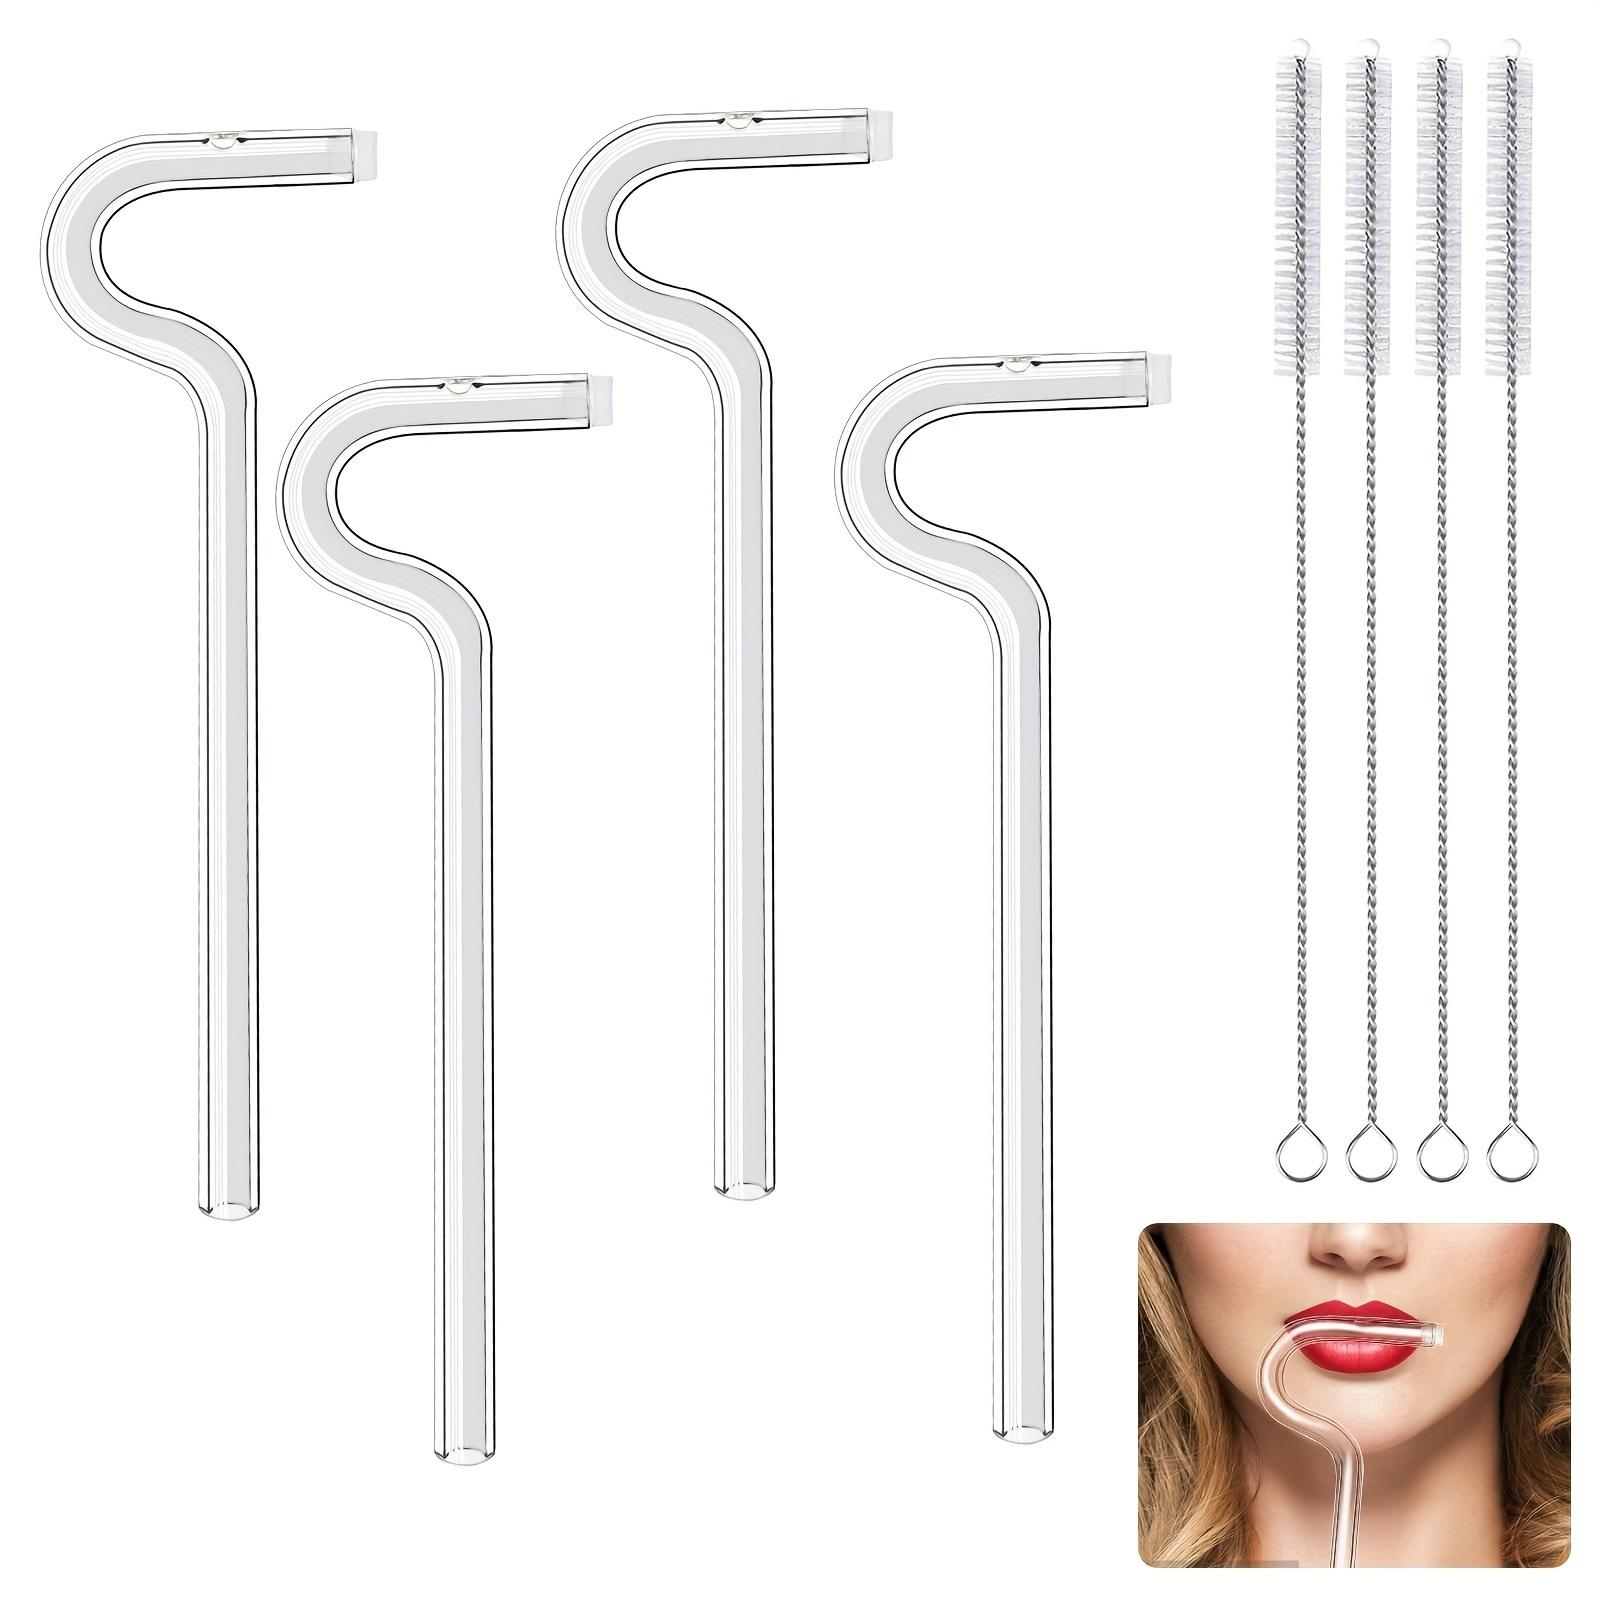  Anti Wrinkle Straw,Flute Style Design for Engaging, No Wrinkle  Straw，Say Goodbye to Wrinkles with Reusable Glass Drinking Lip Straw，Lips  Horizontally for a Smooth Sip: Home & Kitchen